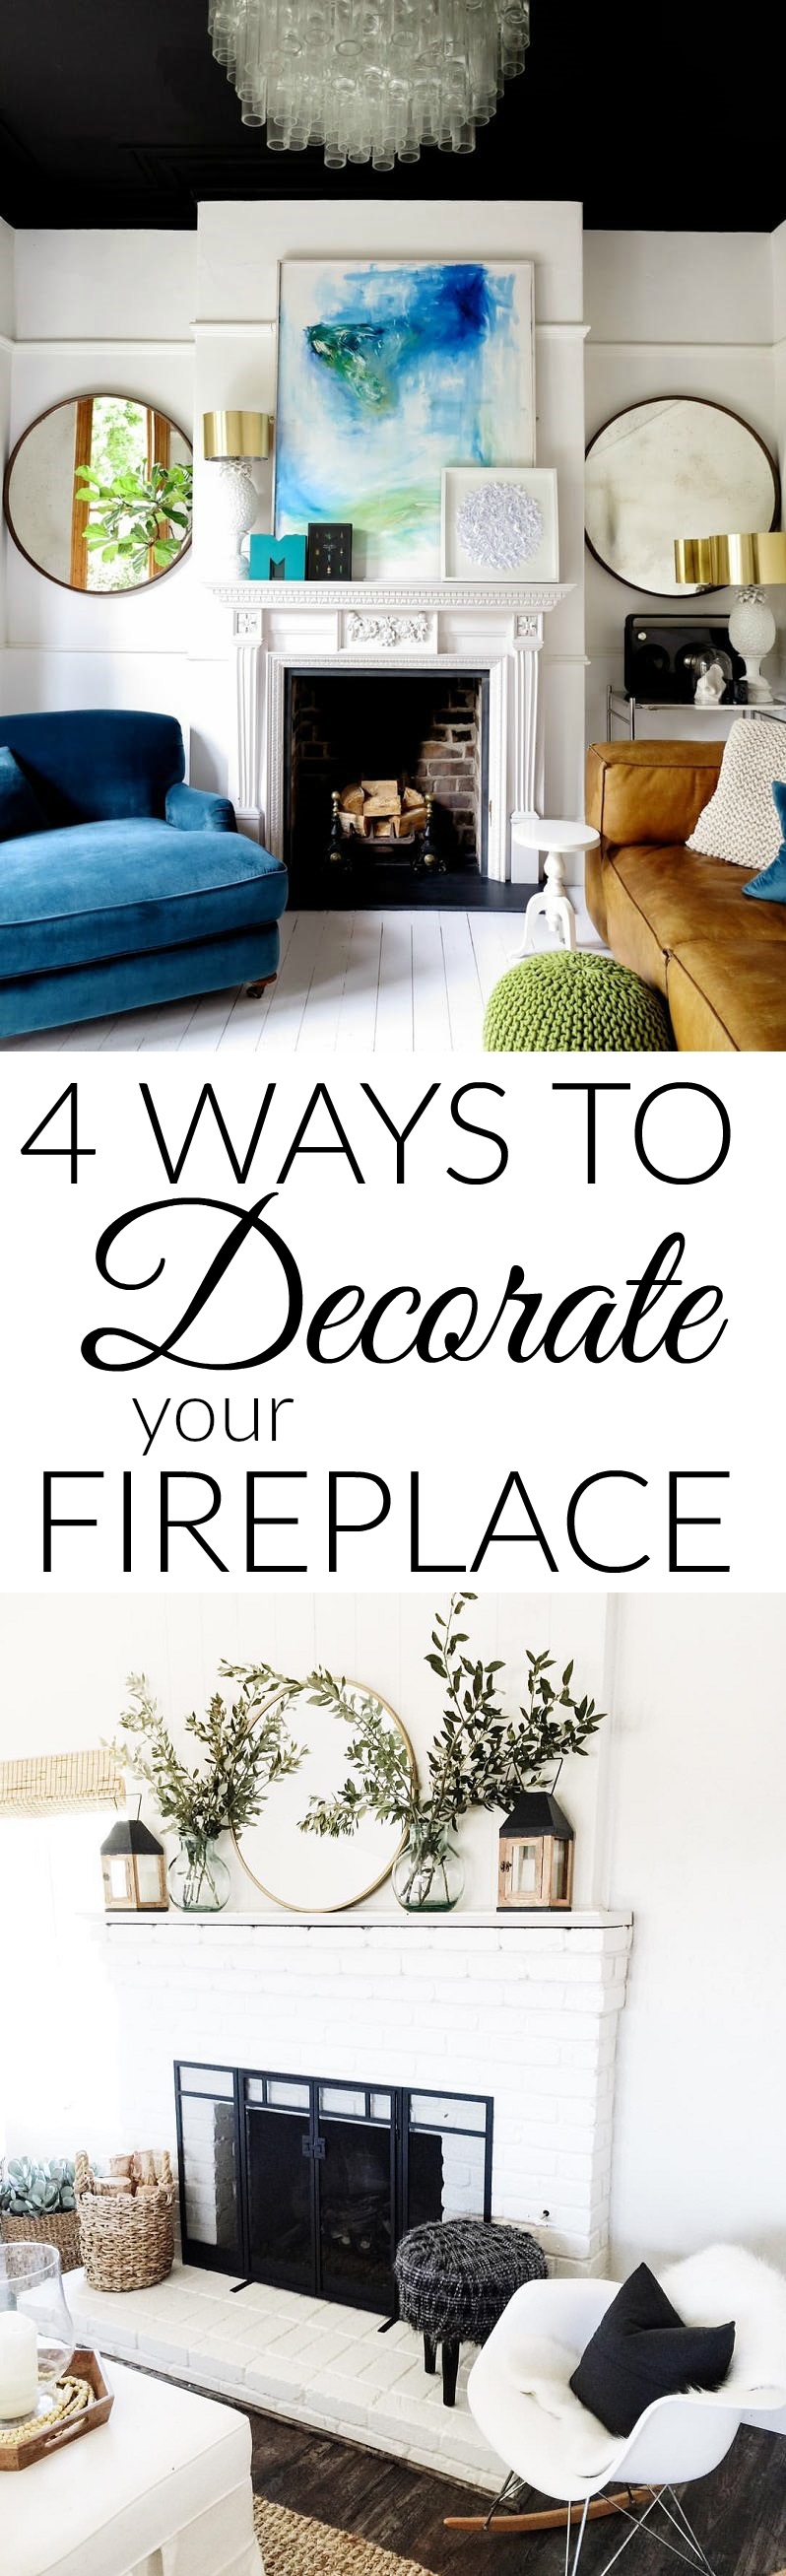 4 Ways to Decorate Your Fireplace